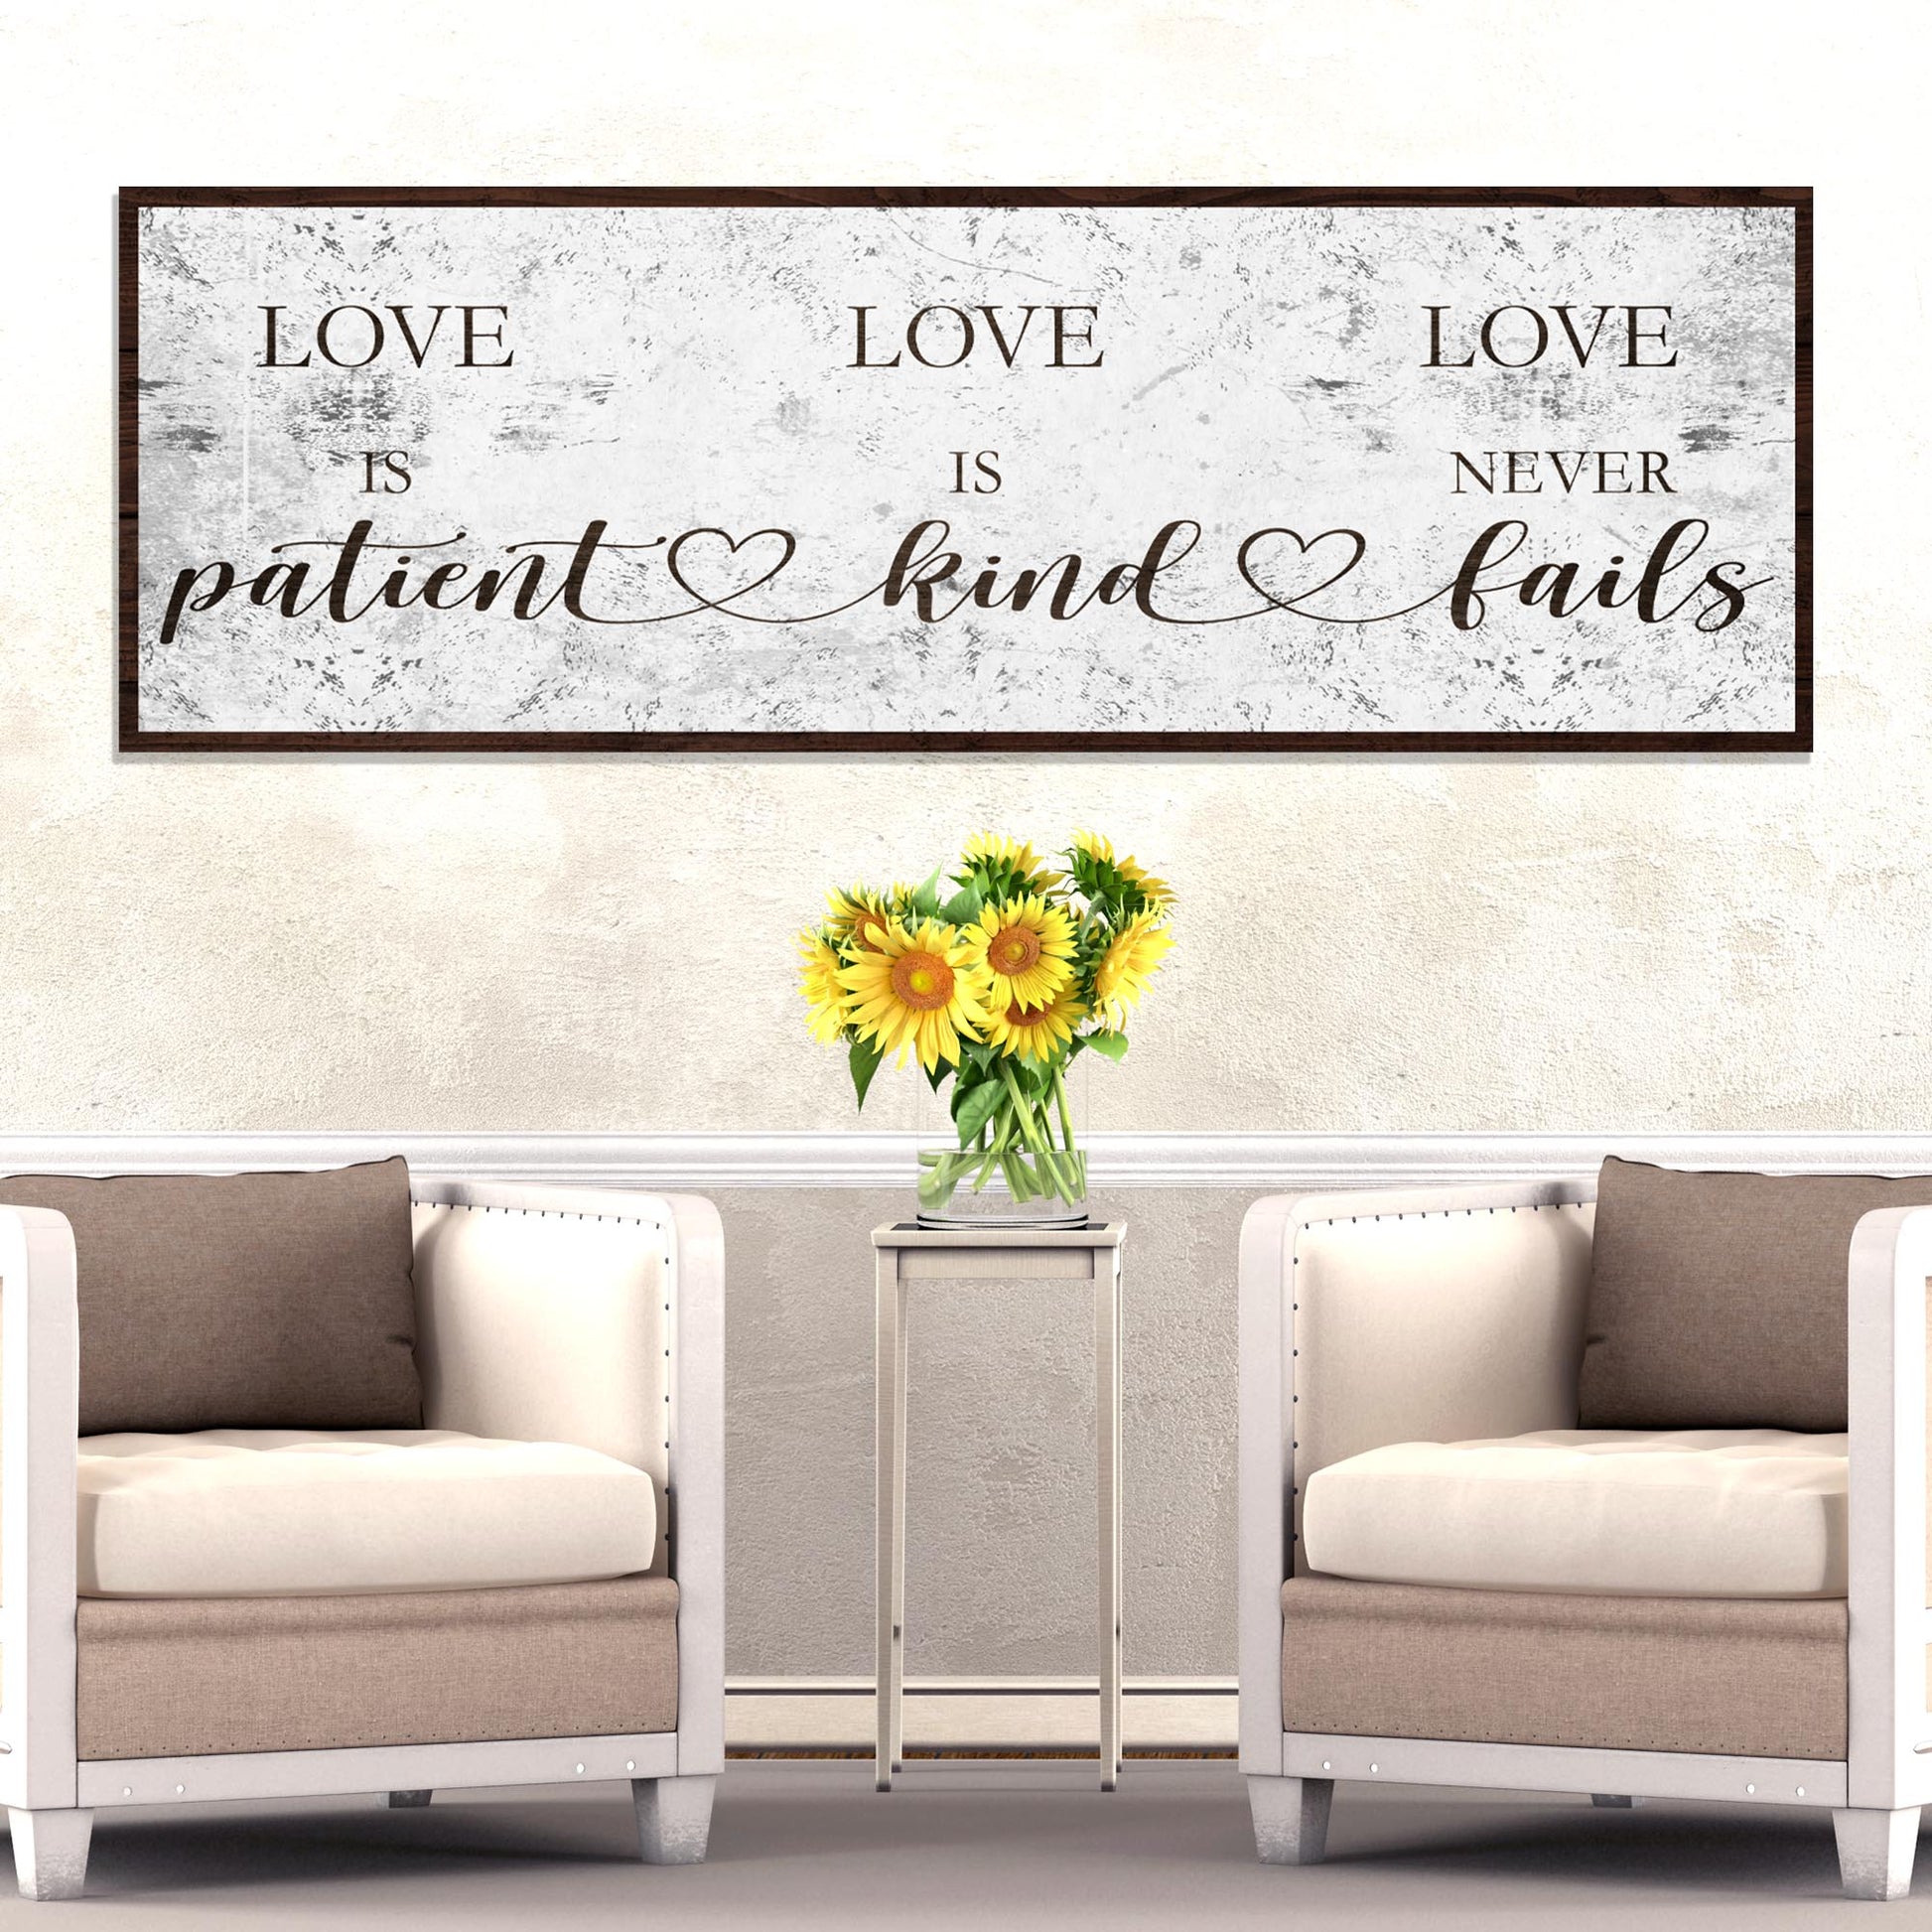 Love is Patient Sign - Image by Tailored Canvases